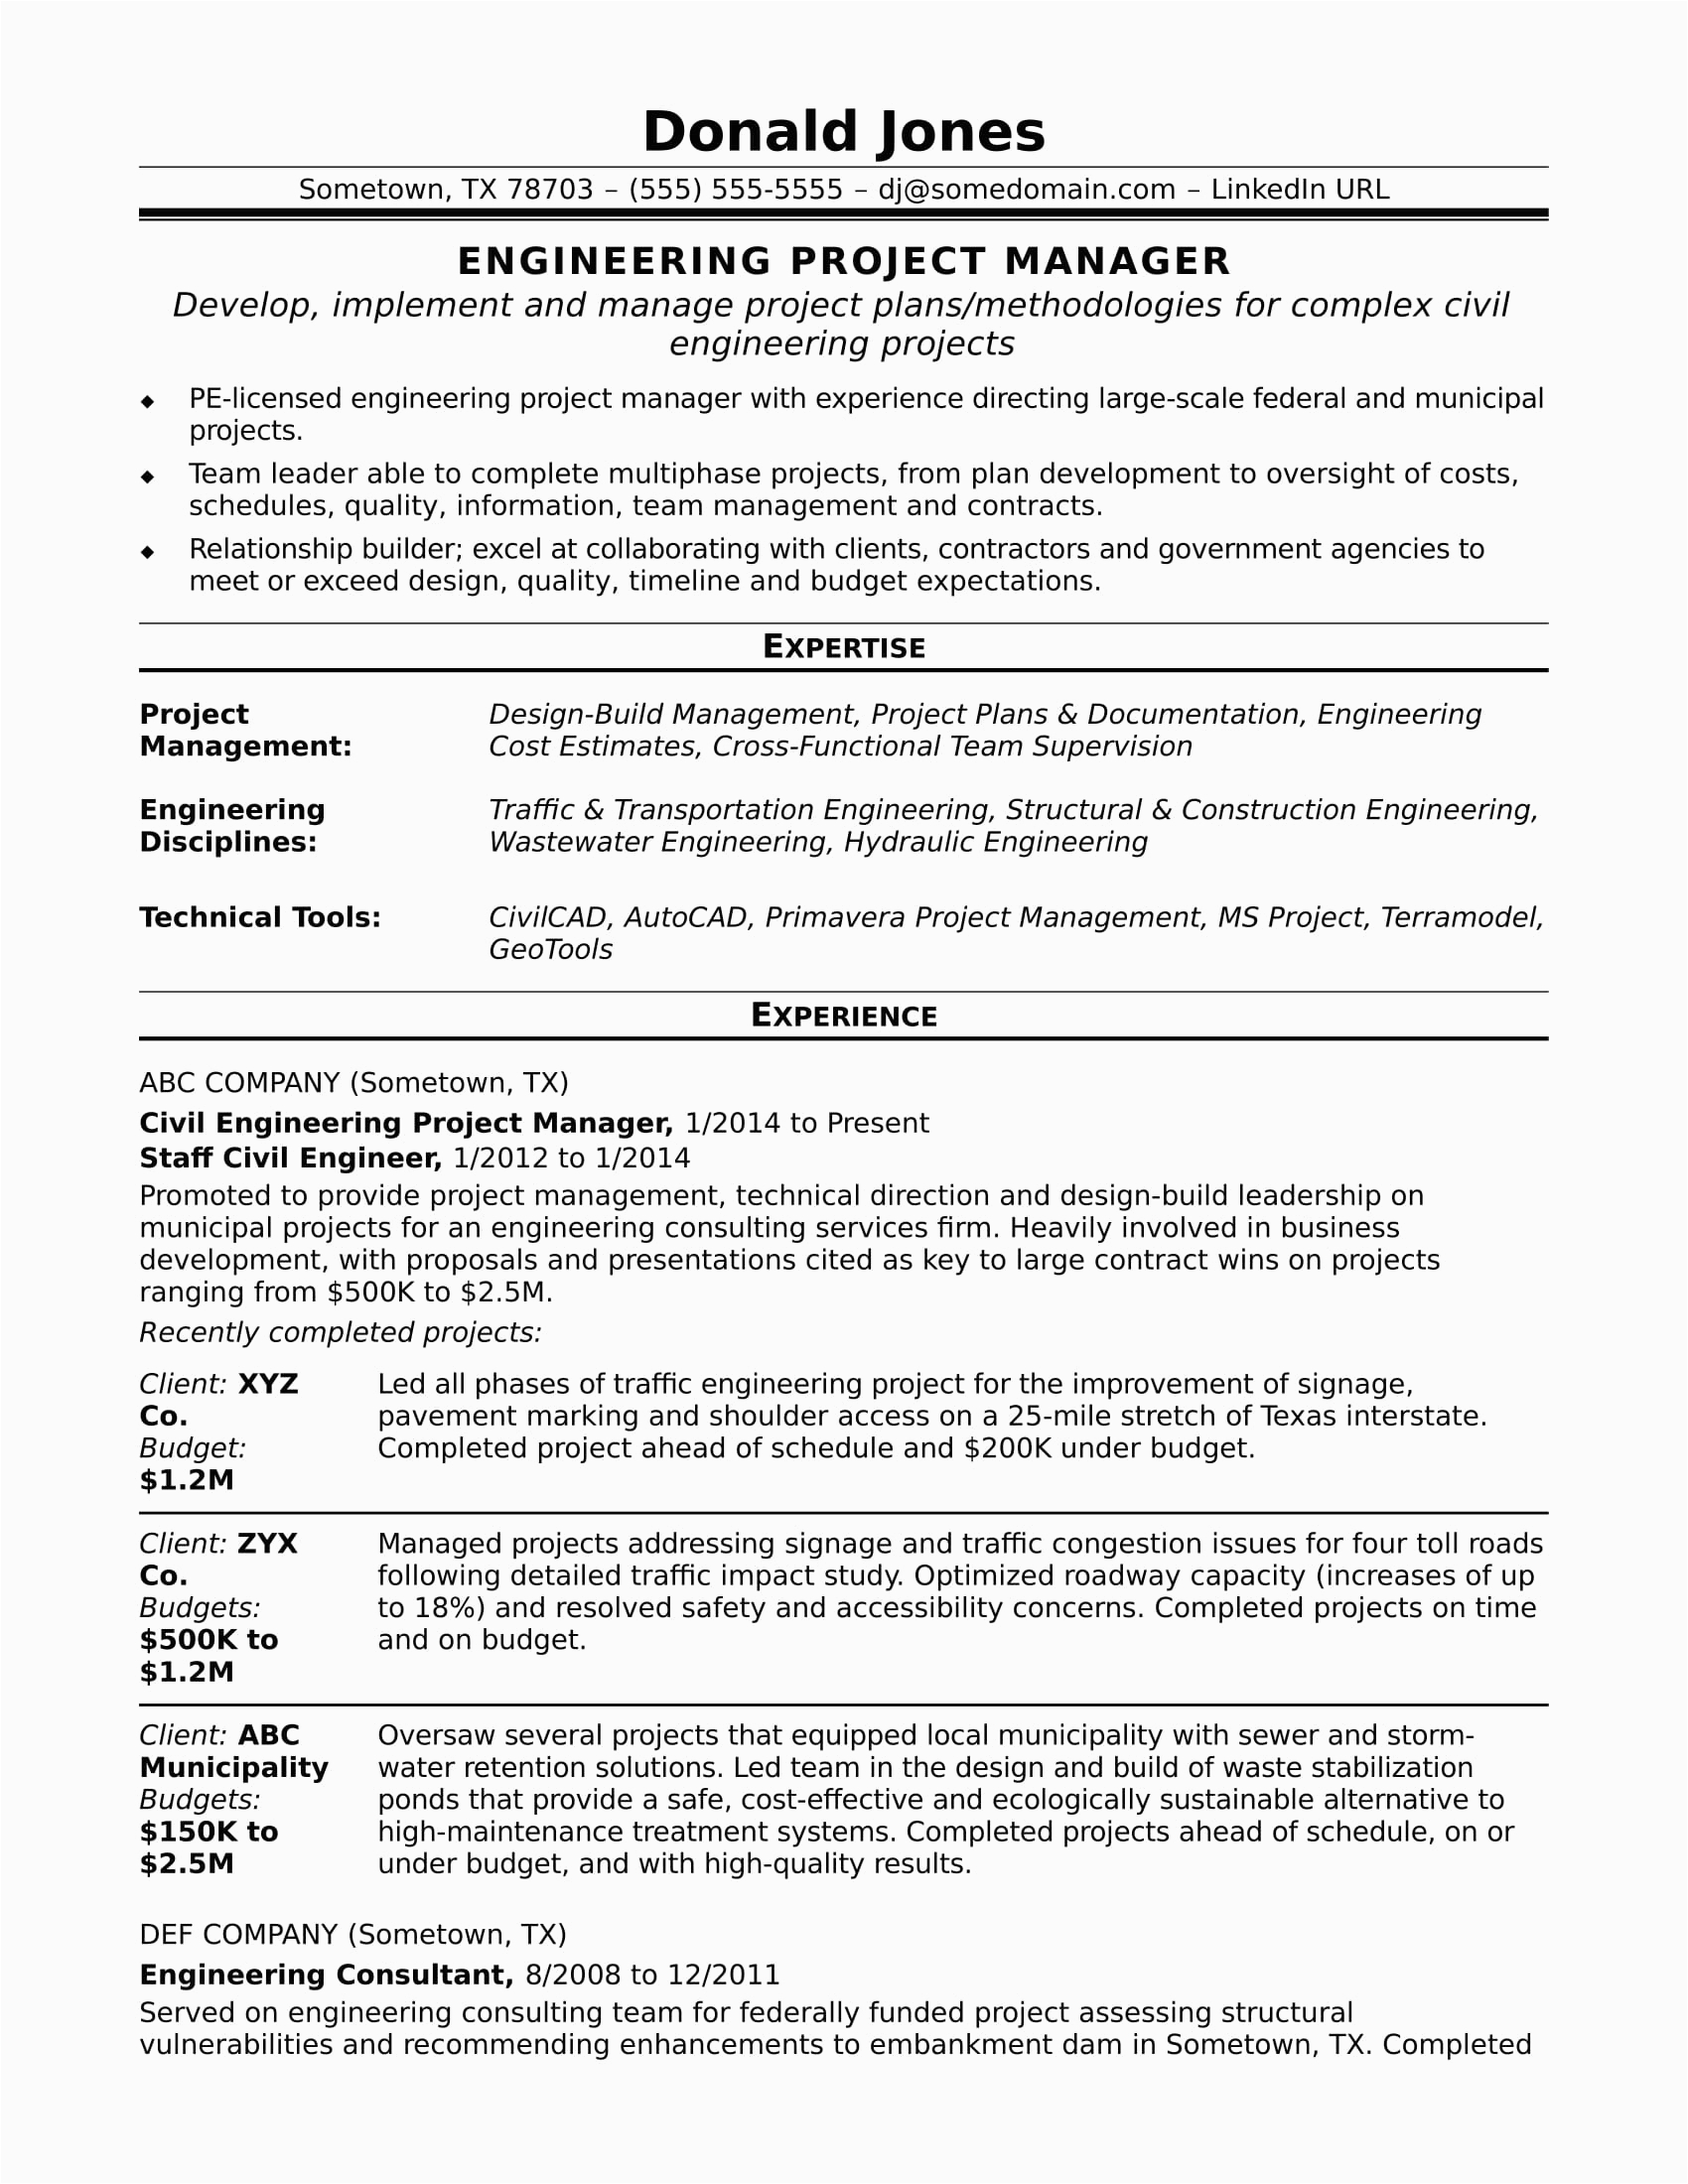 Sample Resume Civil Engineer Project Manager Sample Resume for A Midlevel Engineering Project Manager